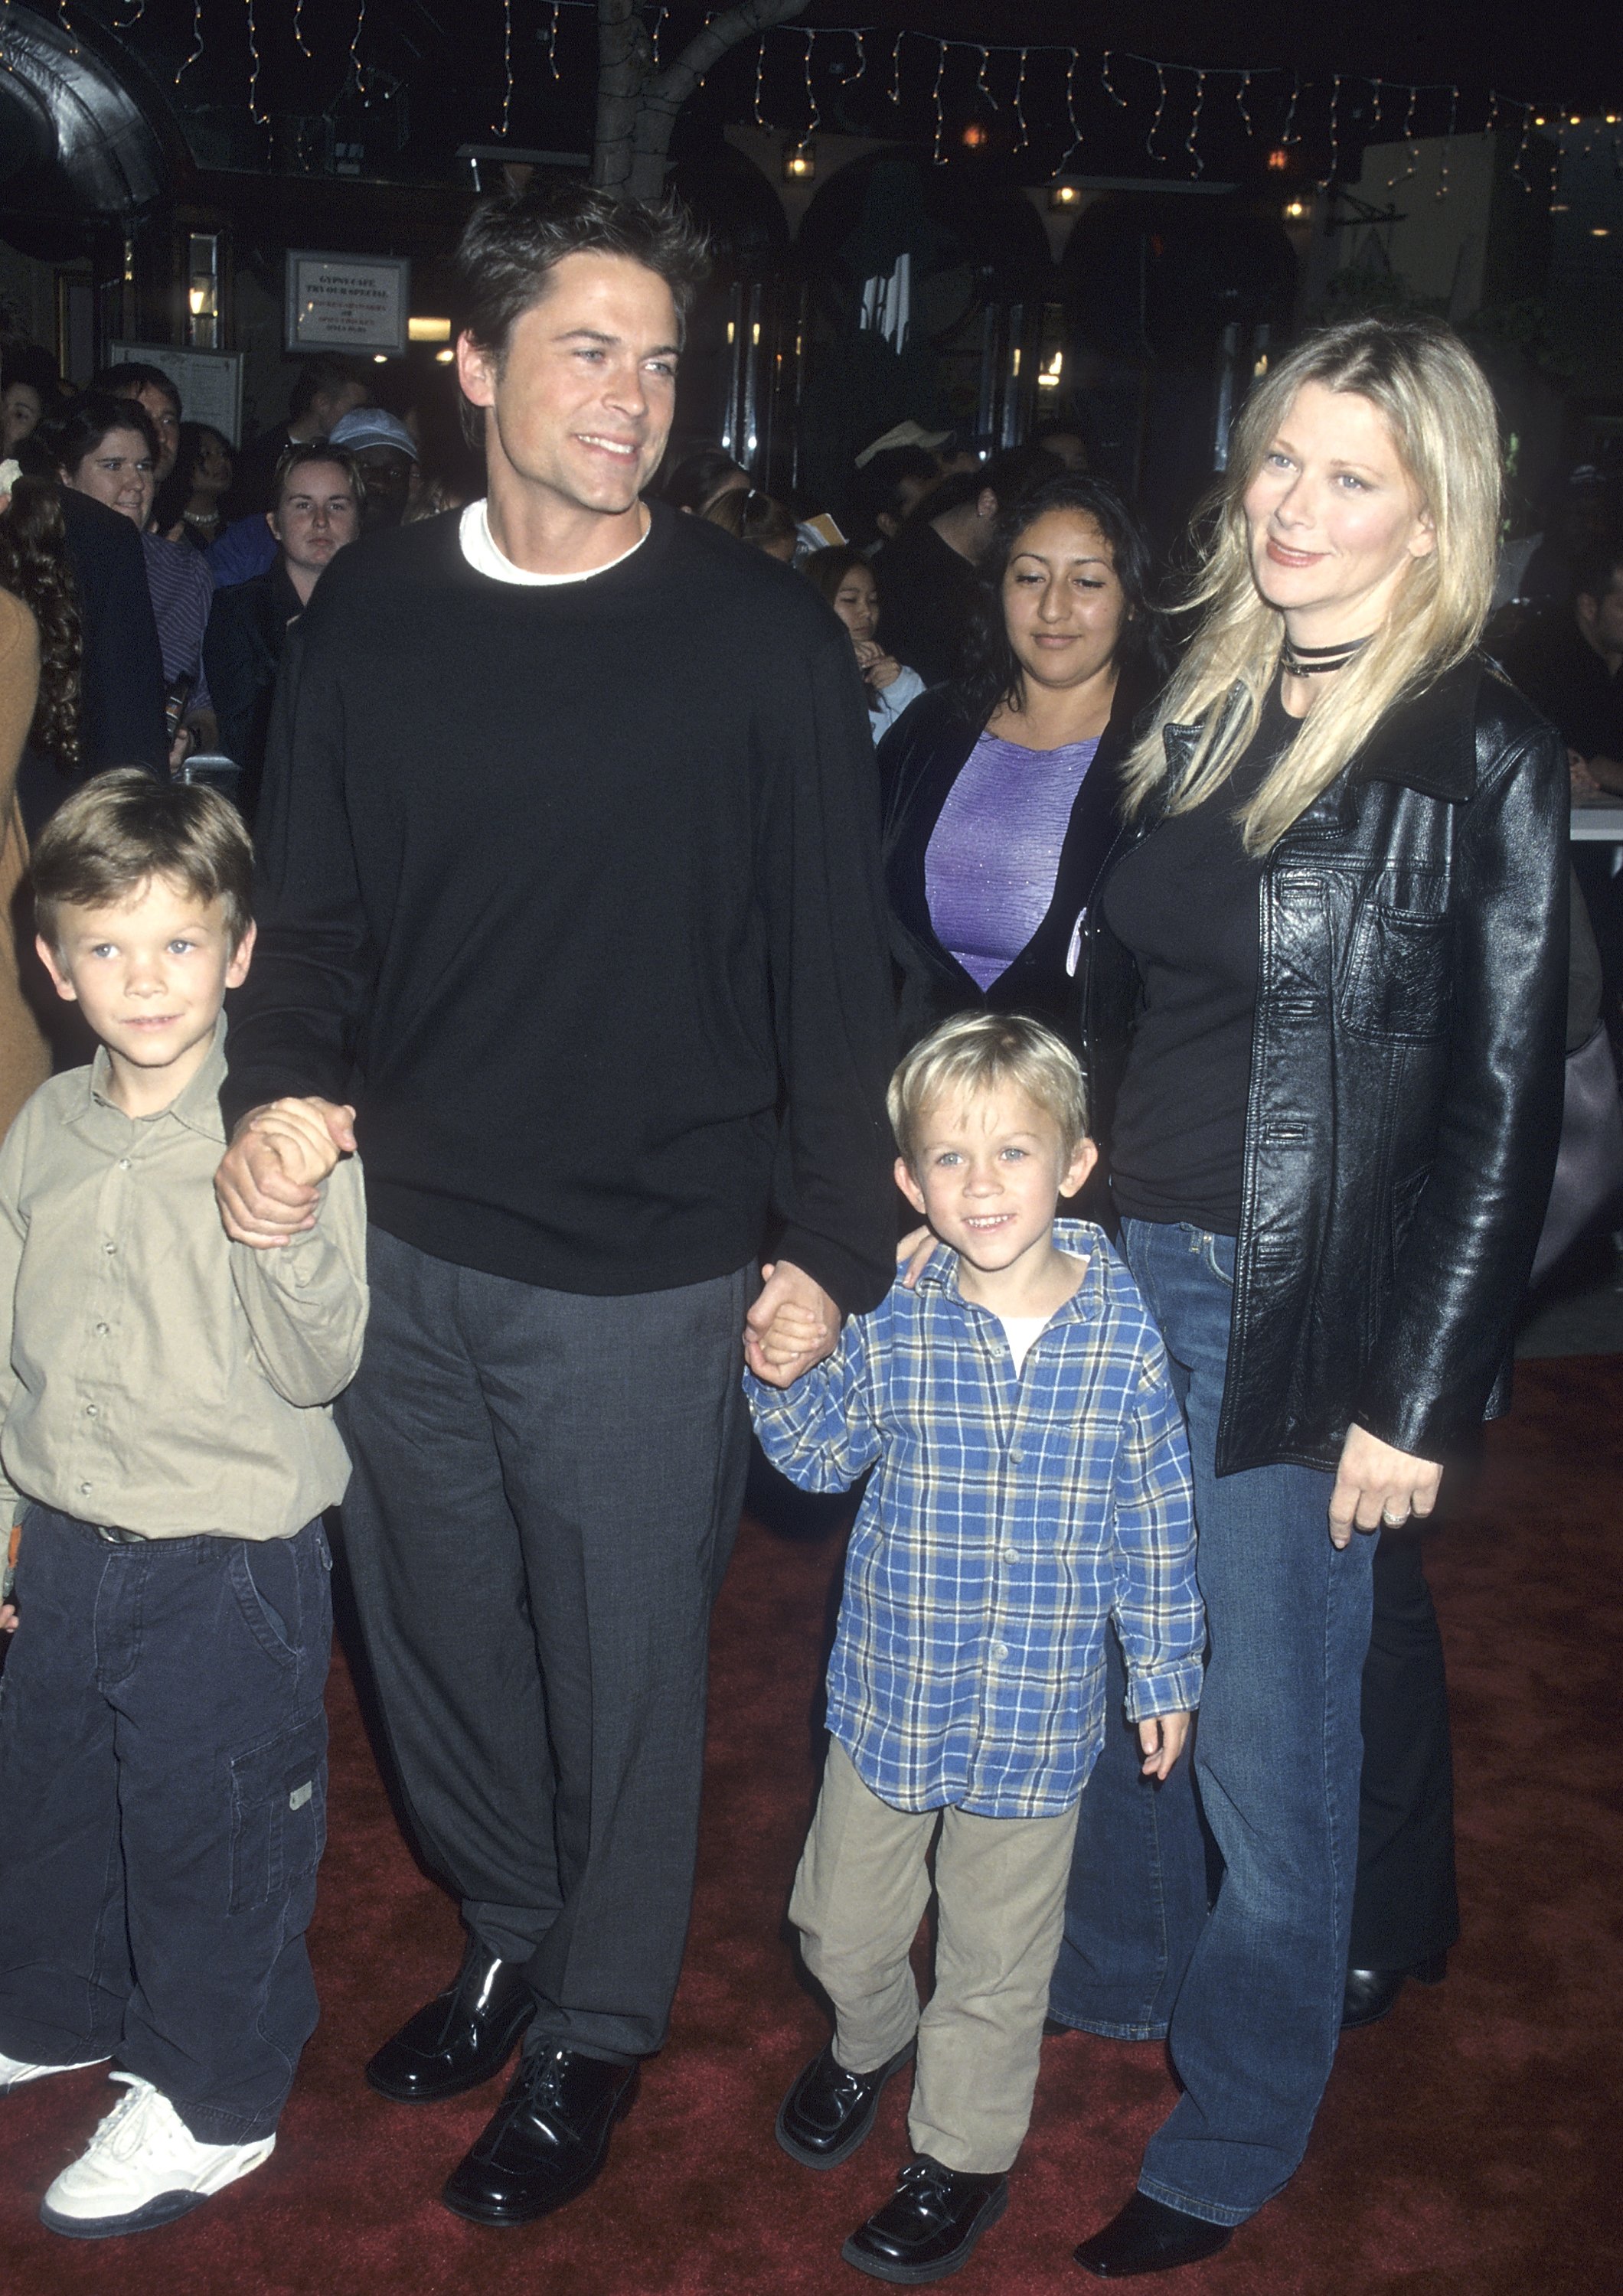 Actor Rob Lowe and wife Sheryl Berkoff and children John and Matthew attend the "Harry Potter and the Sorcerer's Stone" Westwood Premiere on November 14, 2001 at the Mann Village Theatre in Westwood, California. | Source: Getty Images